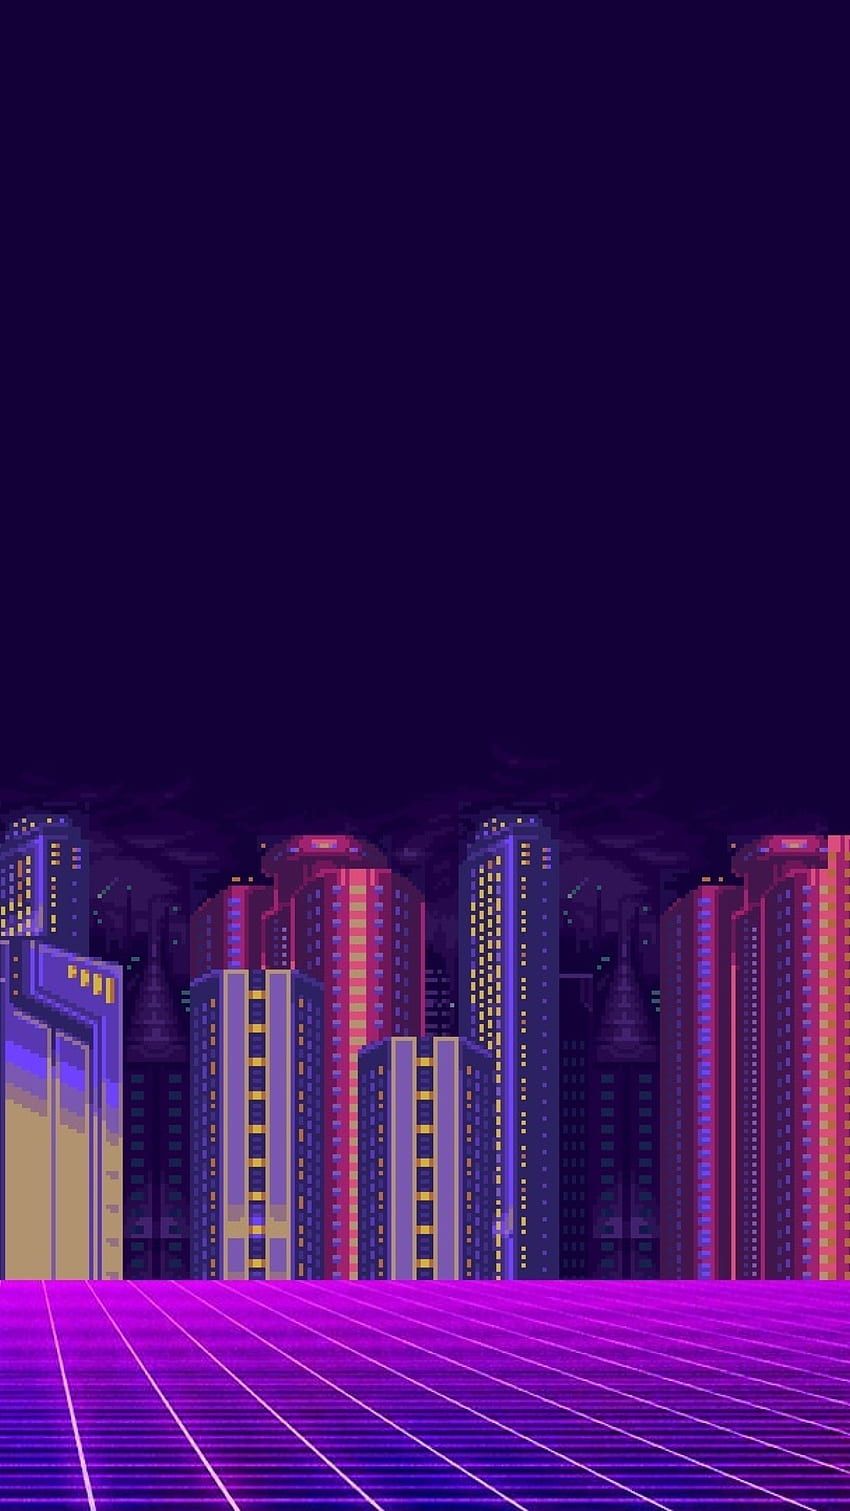 Purple neon city wallpaper for your phone - Synthwave